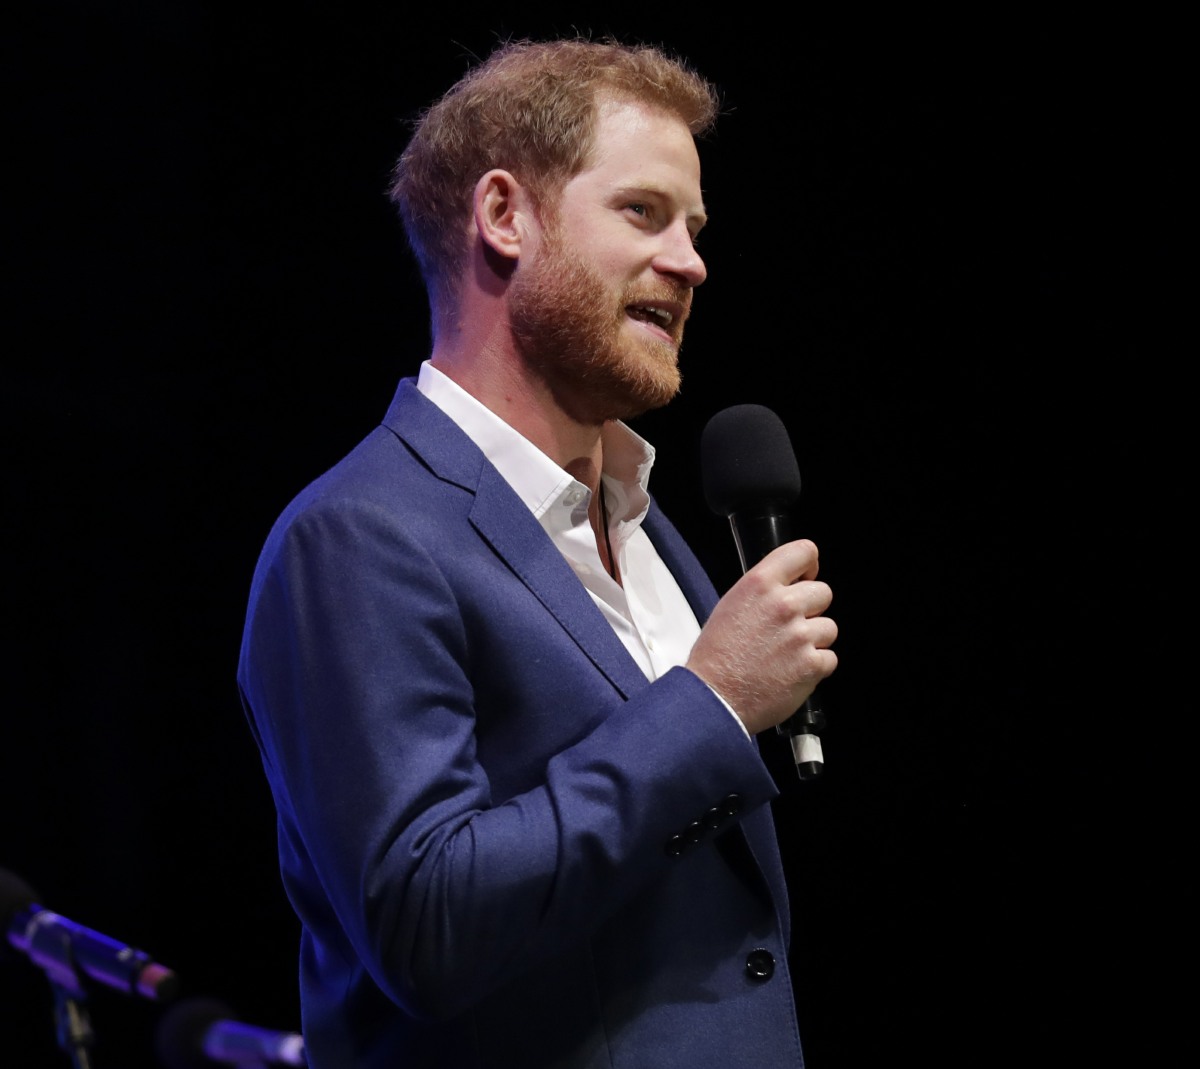 Britain's Prince Harry speaks on stage during a concert hosted by his charity Sentebale at Hampton Court Palace, in London, Tuesday June 11, 2019. The concert will raise funds and awareness for Sentebale, the charity founded by Prince Harry and Lesotho's